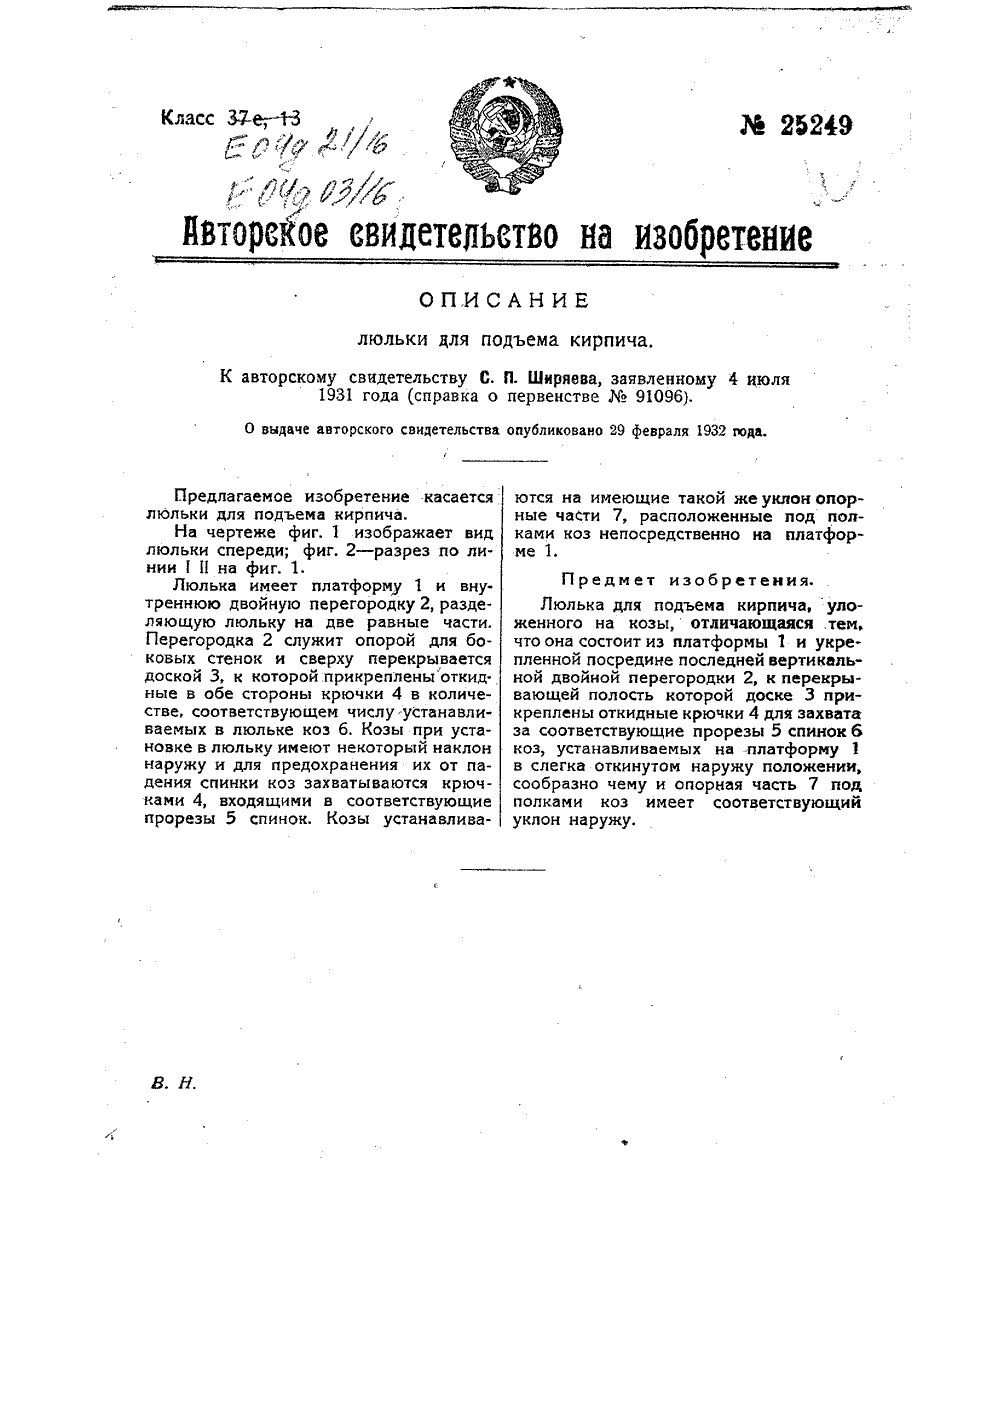 http://images.vfl.ru/ii/1506651473/c7be1632/18785381.png